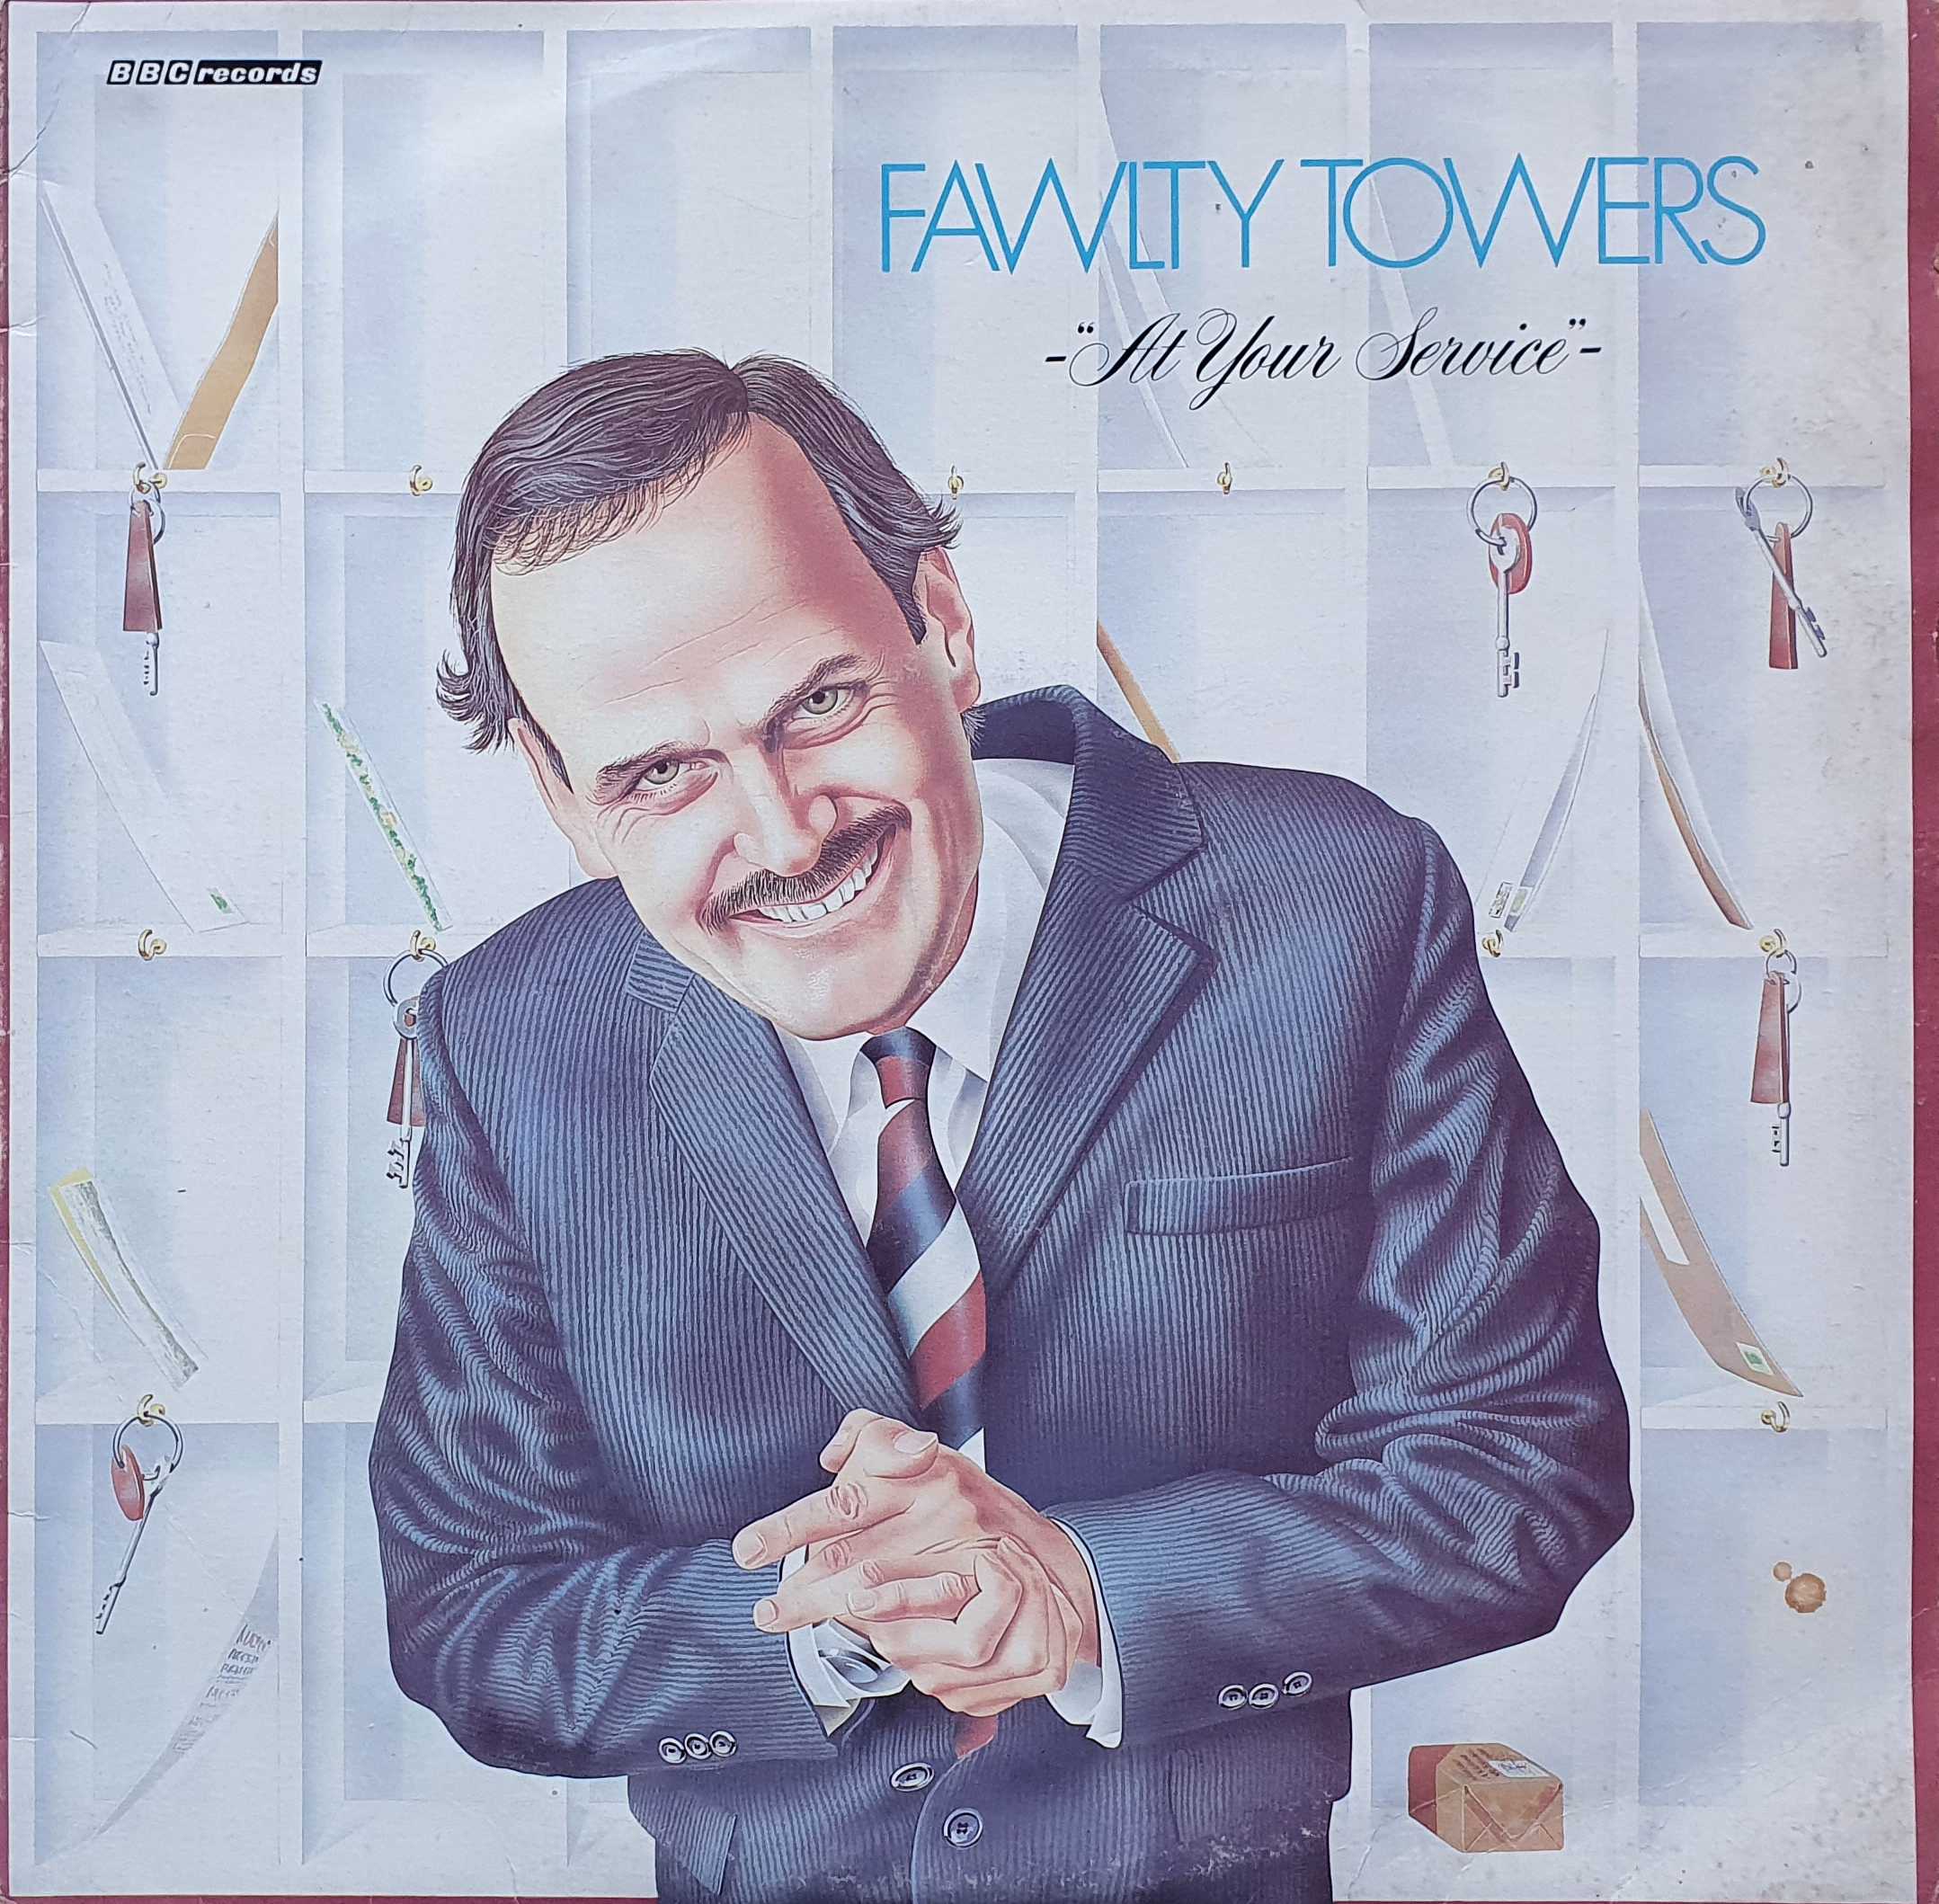 Picture of 2964 078 Fawlty Towers - At your service (Australian import) by artist John Cleese / Connie Booth from the BBC albums - Records and Tapes library